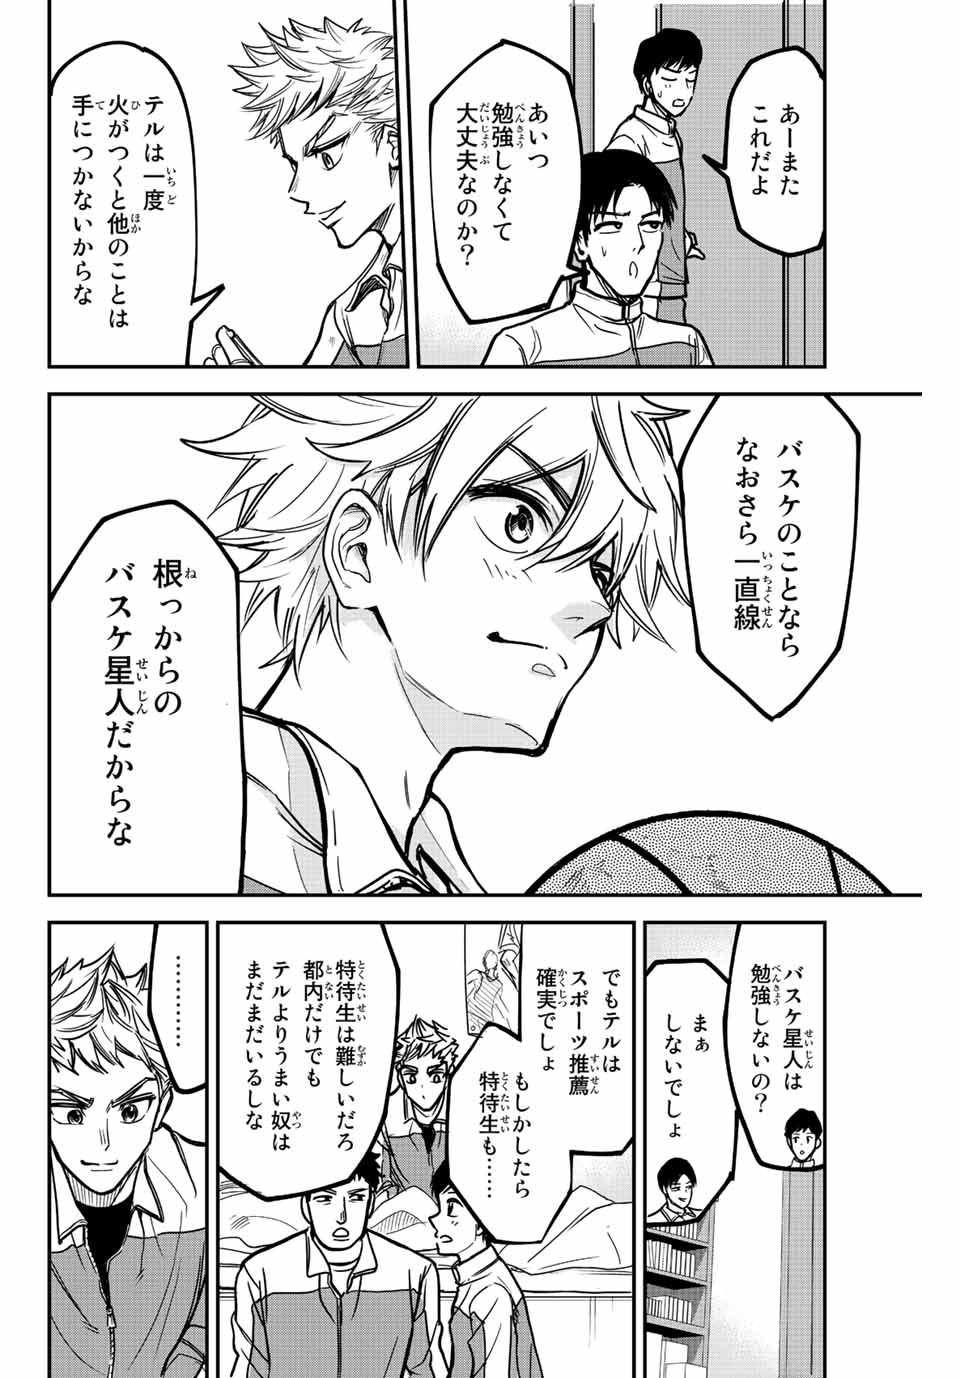 B＆ALIVE 第1.1話 - Page 10